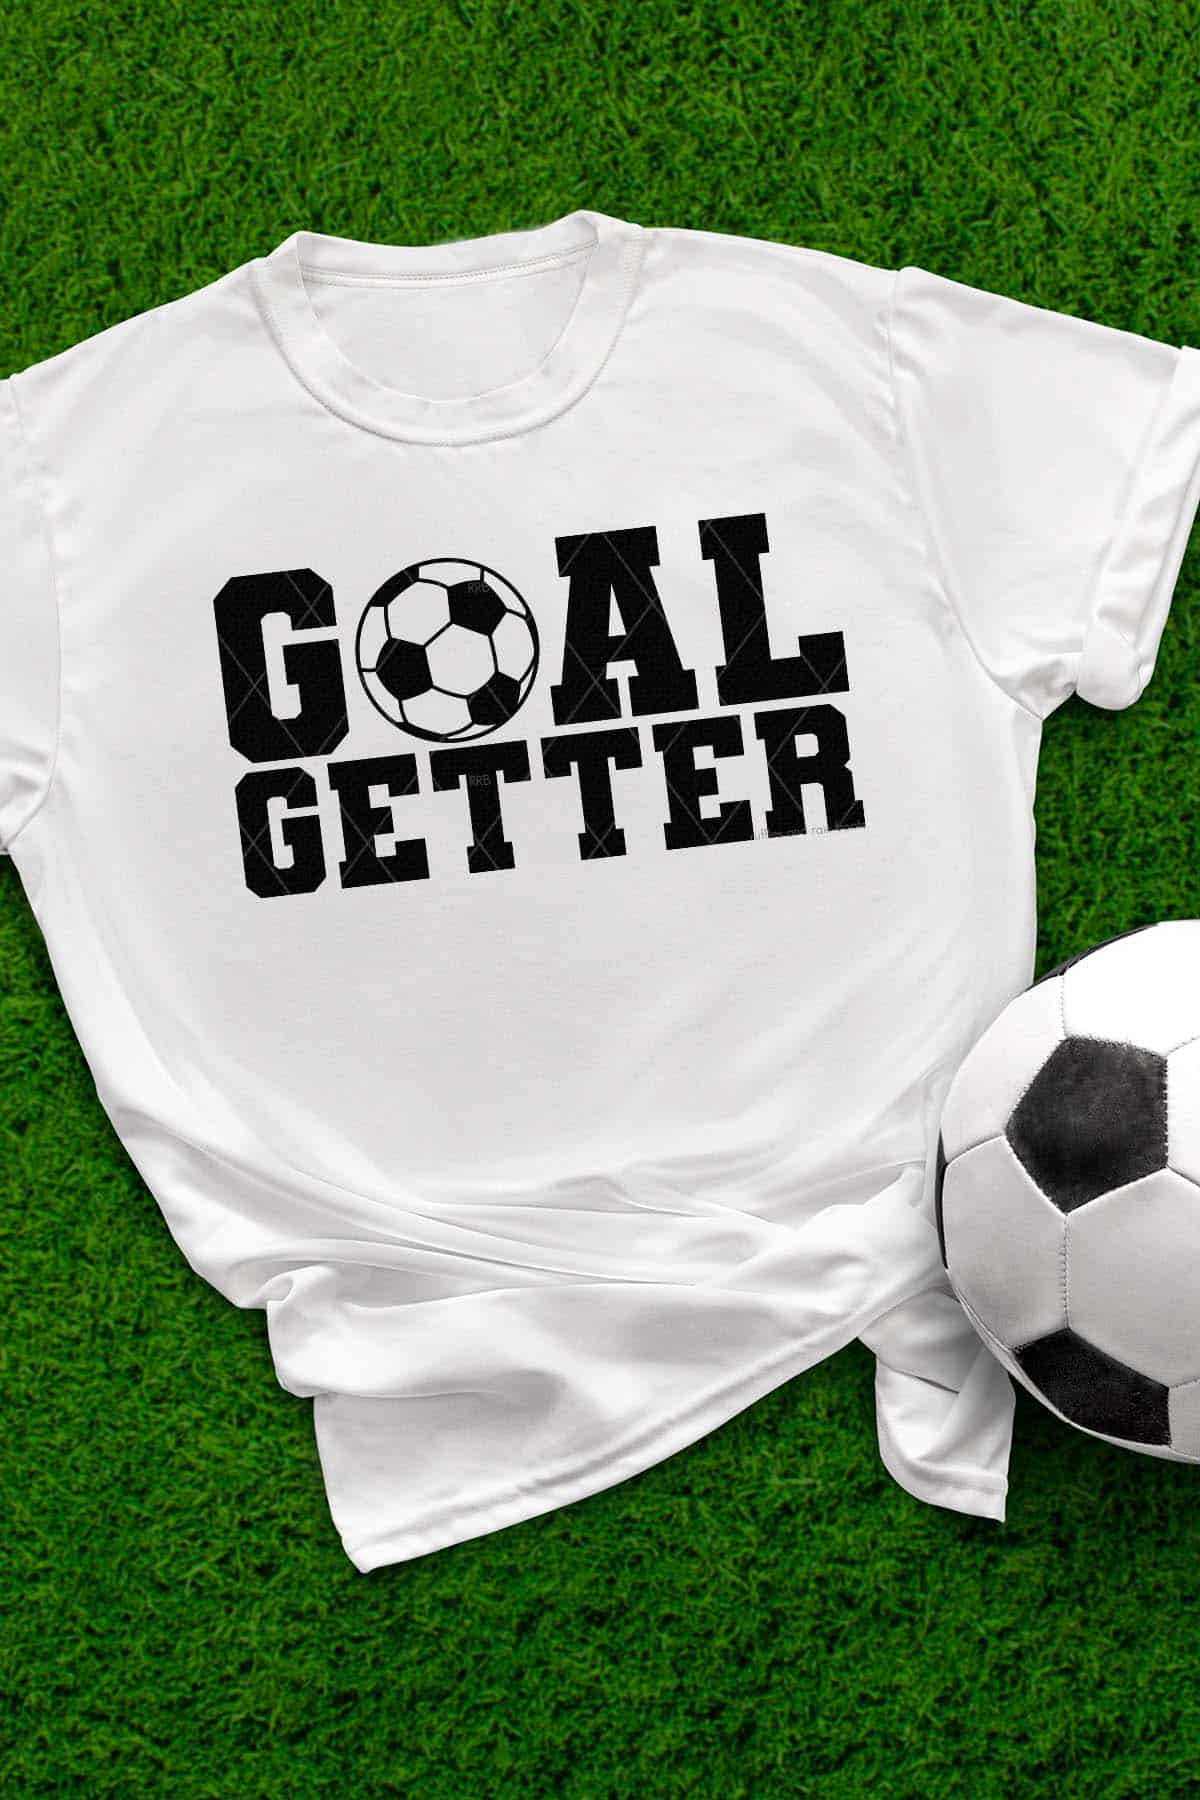 Vertical image of a white t-shirt which reads goal getter with a soccer ball SVG laid on grass next to a soccer ball.